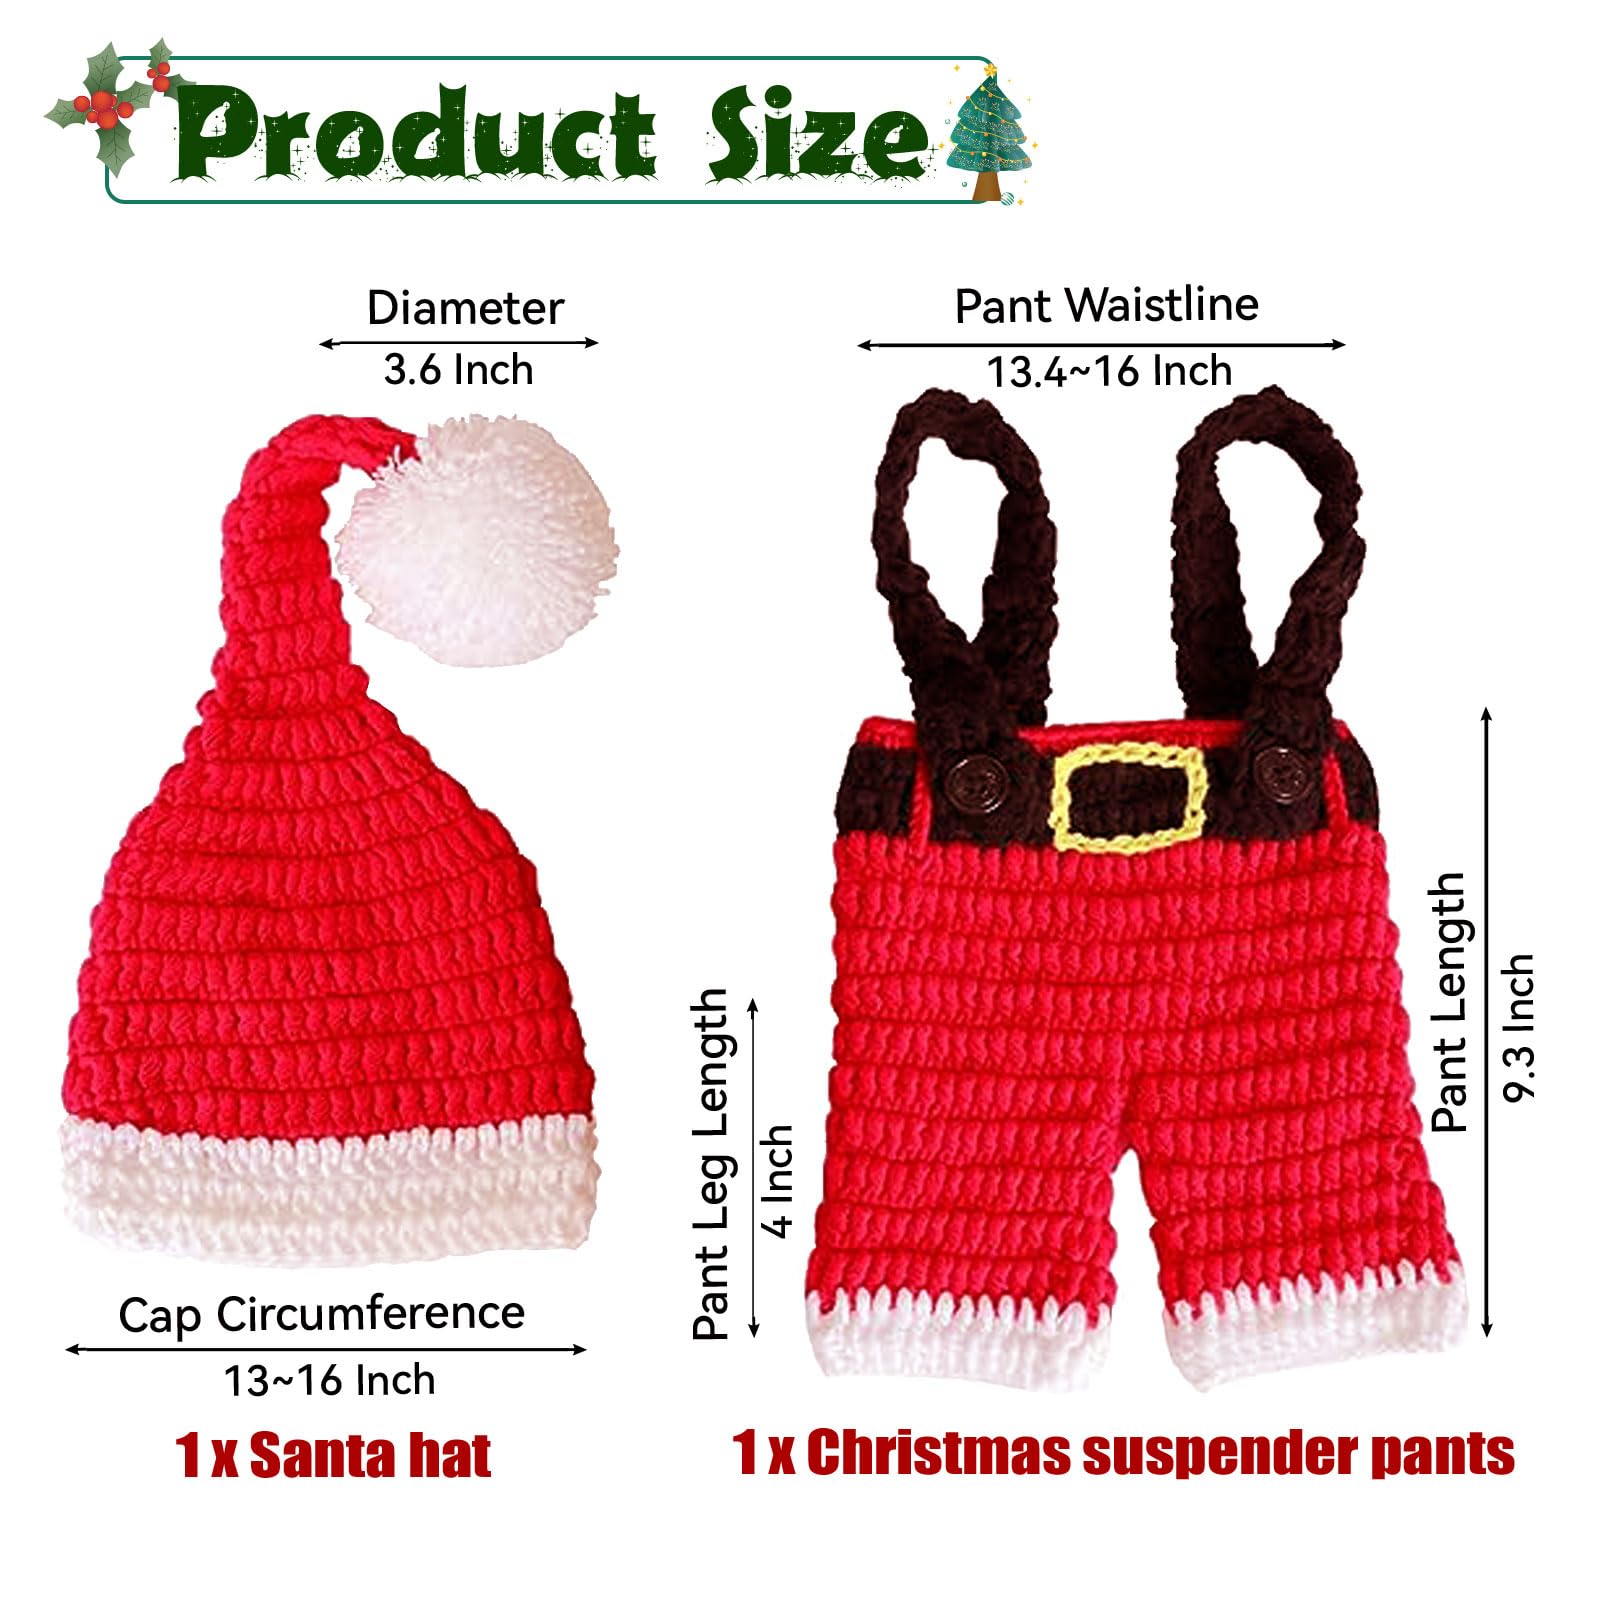 AIXIANG Baby Photography Props Christmas Cap Newborn Crochet Santa Claus Outfits Baby First Christmas Photo Props